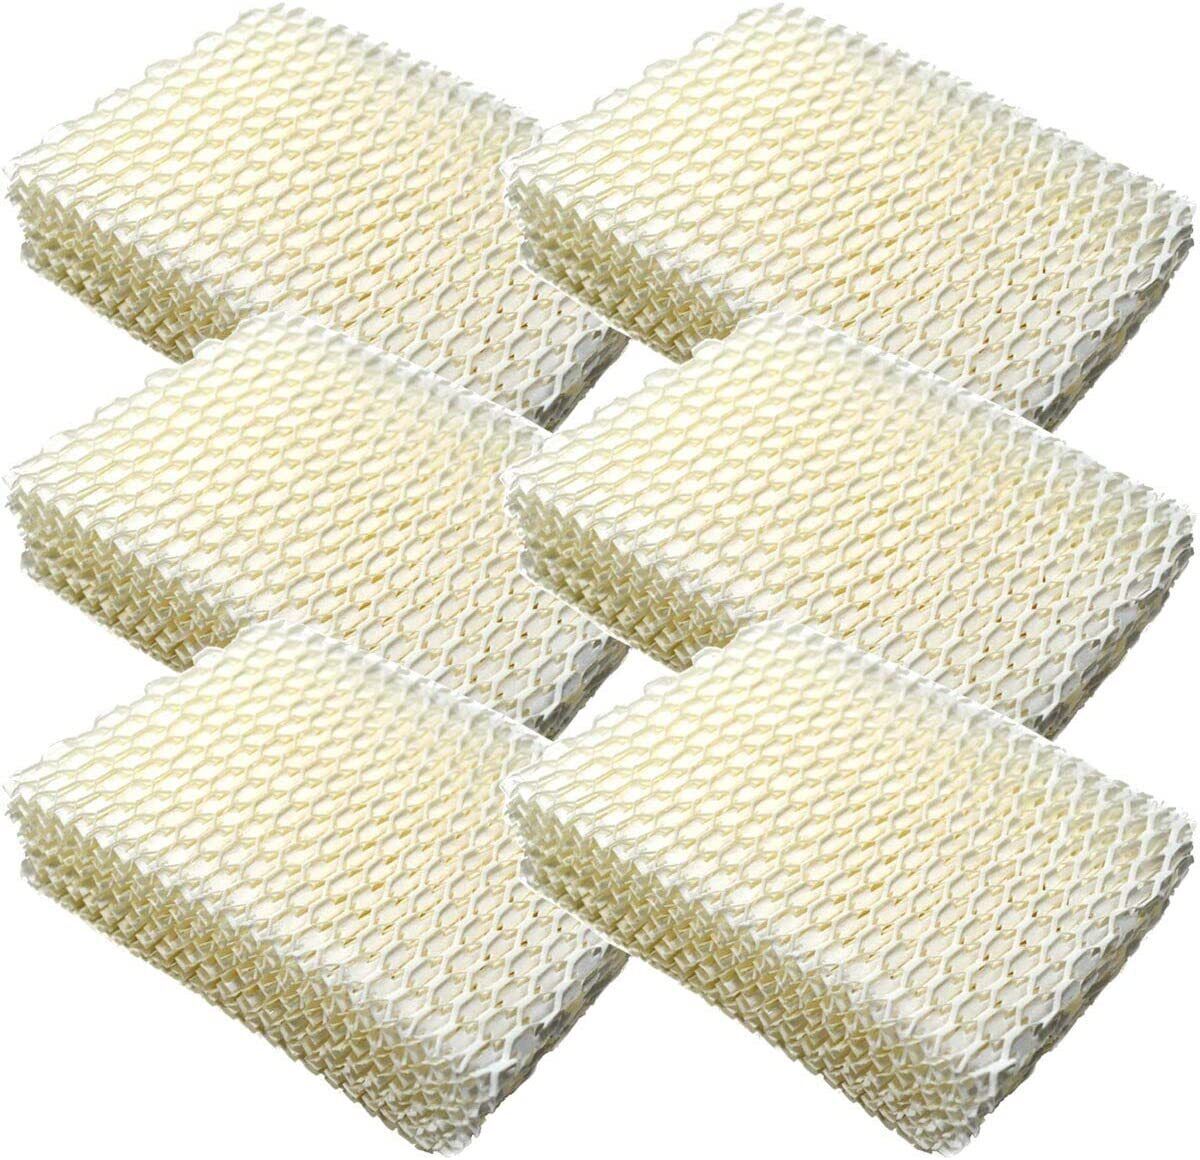 WF813 Humidifier Wick Filter Replace for Relion RCM-832 RCM-832N ProCare PCWF813